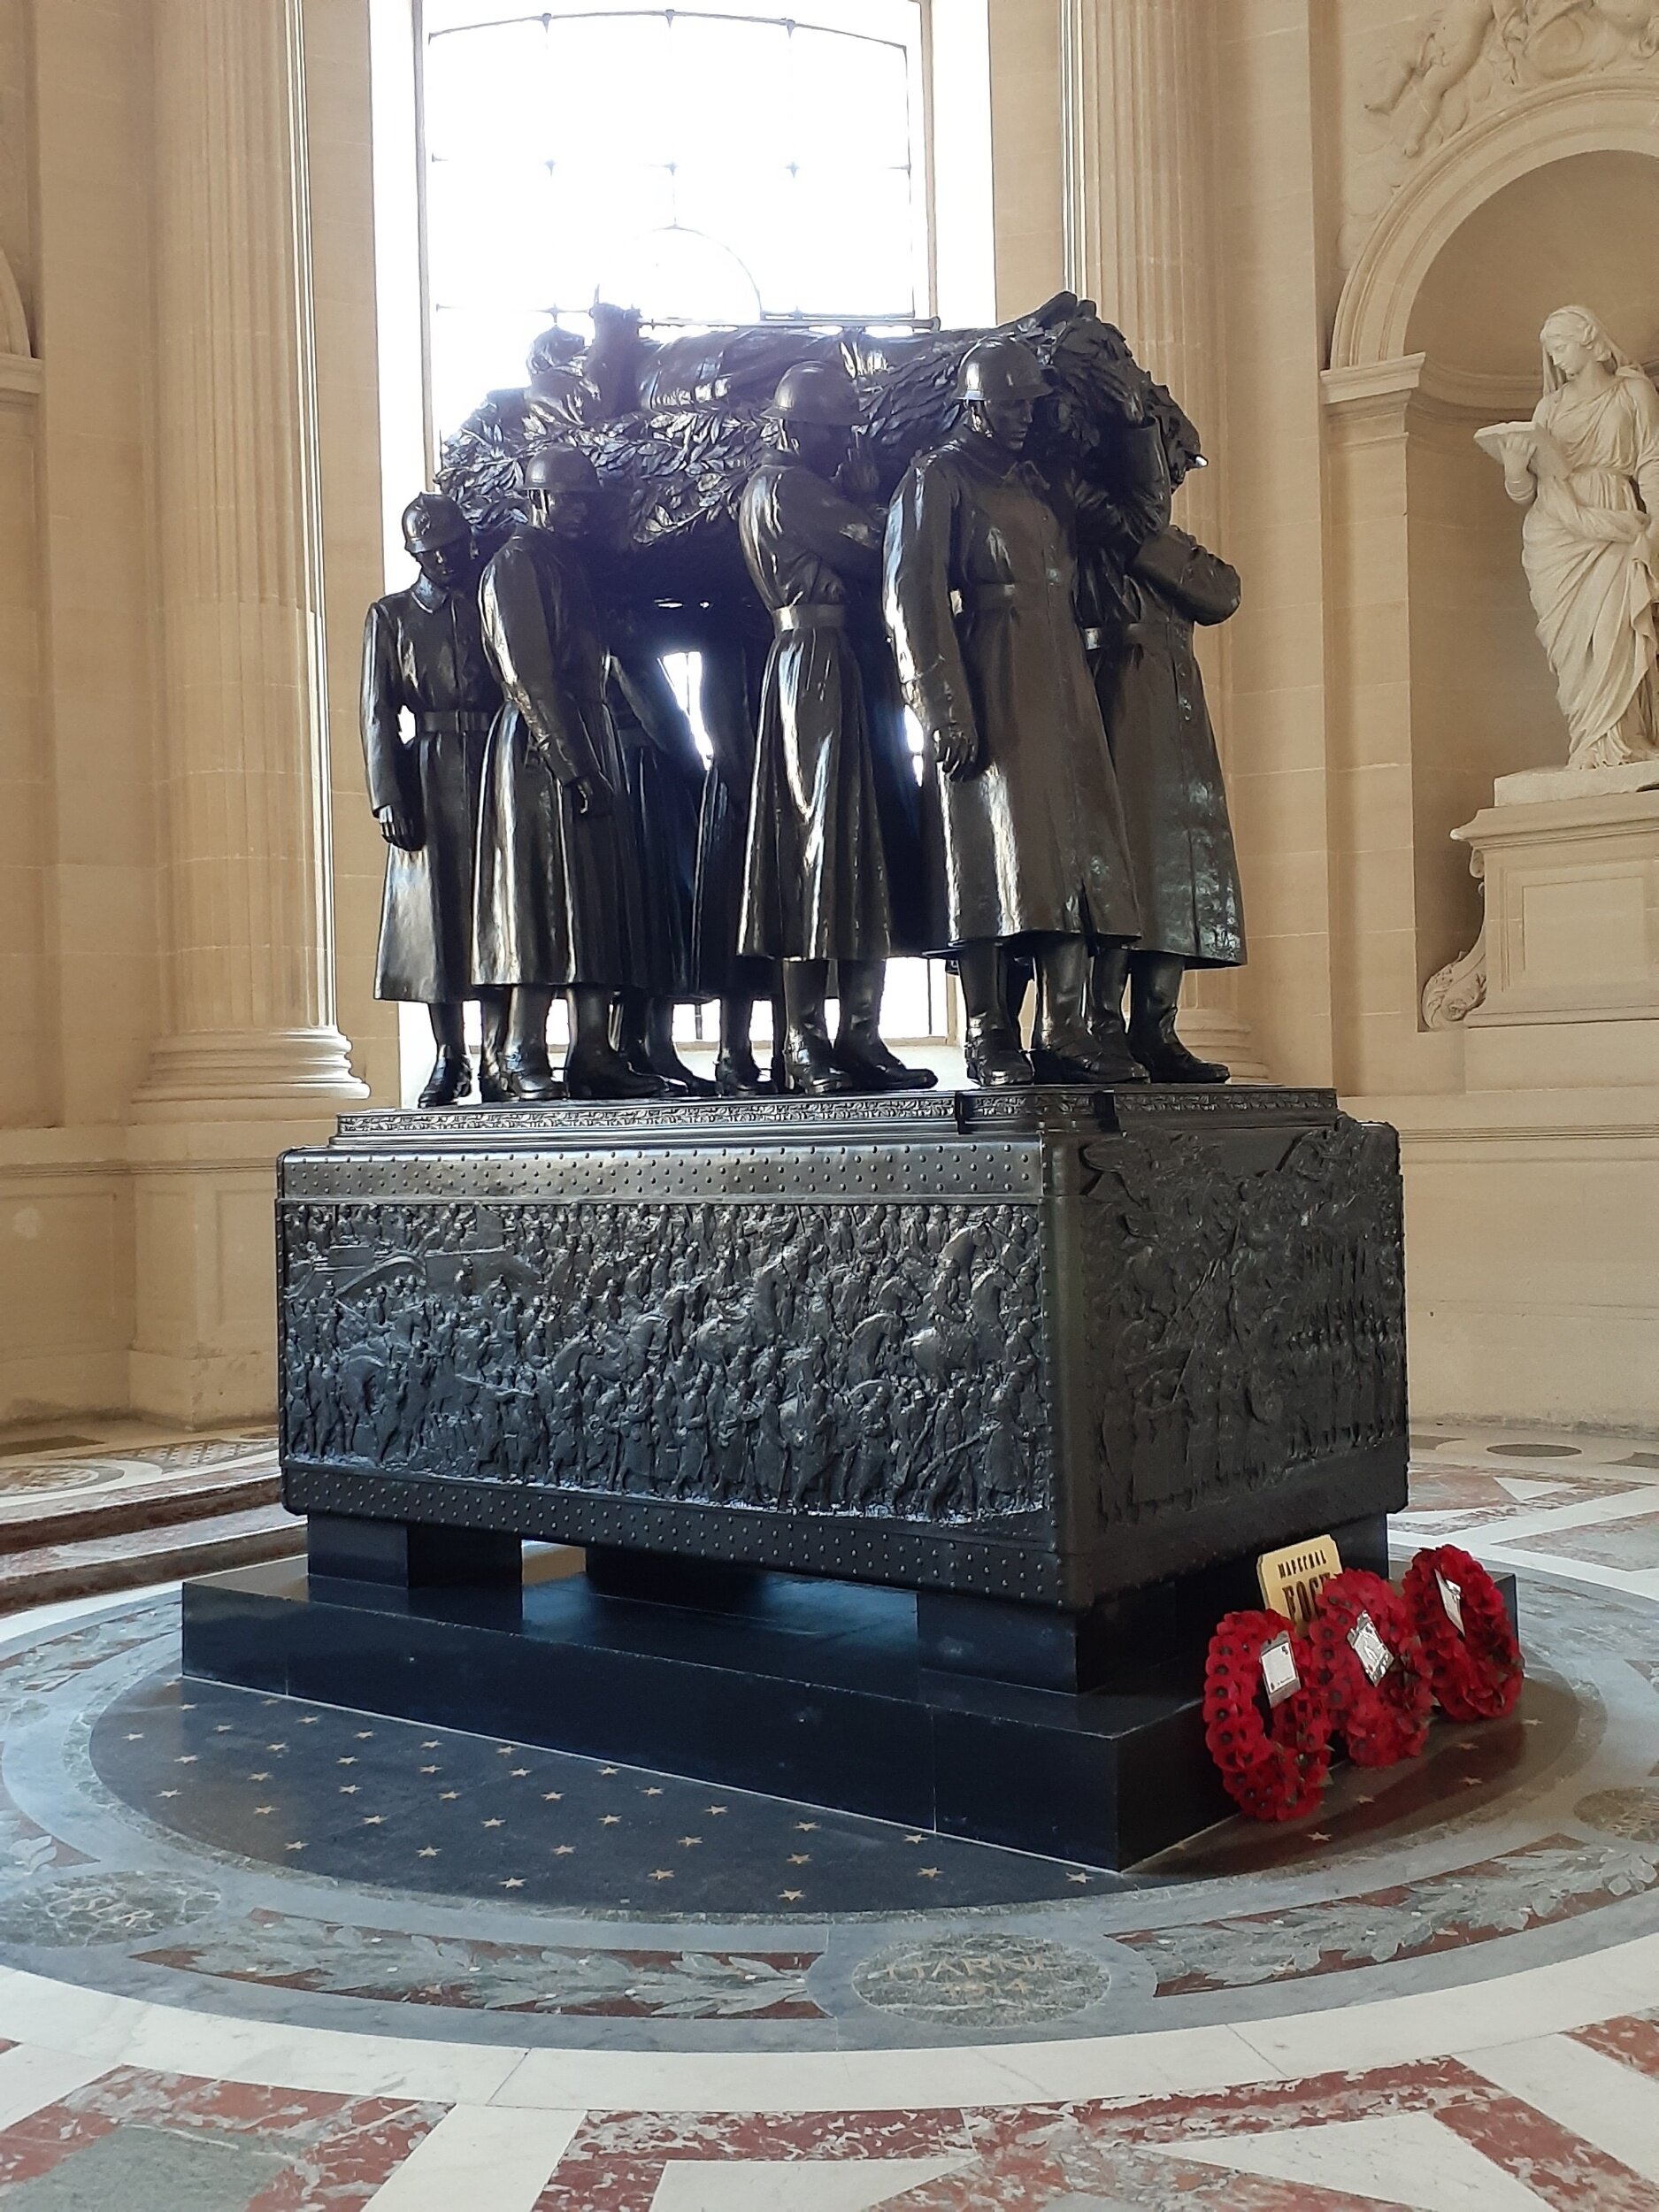 General Foch's Tomb - Invalides Army Museum